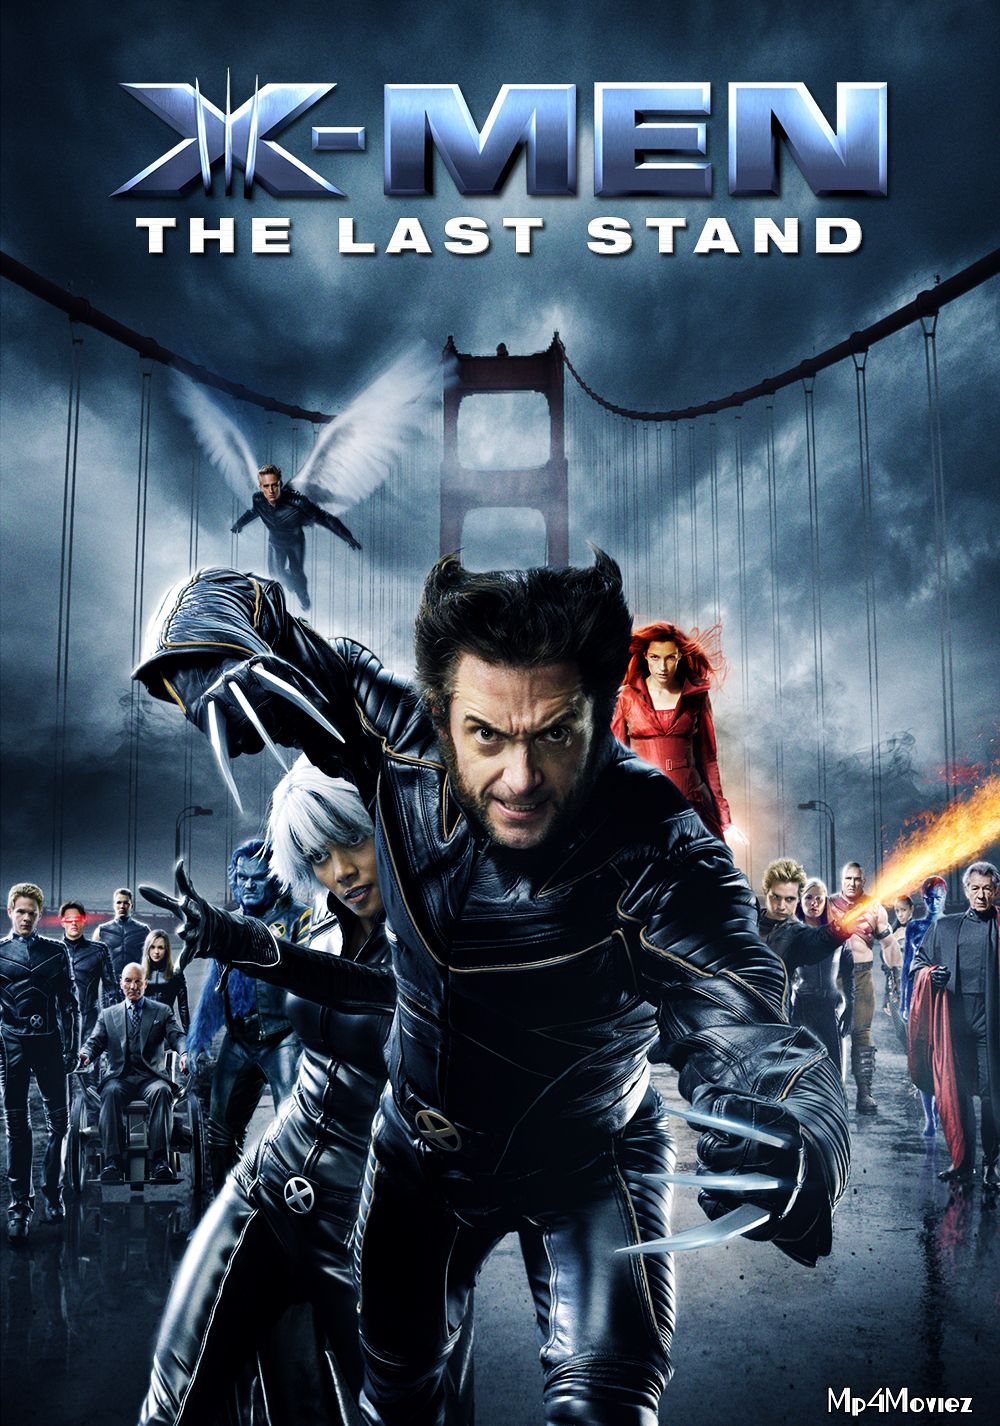 X-Men The Last Stand 2006 Hindi Dubbed Full Movie download full movie